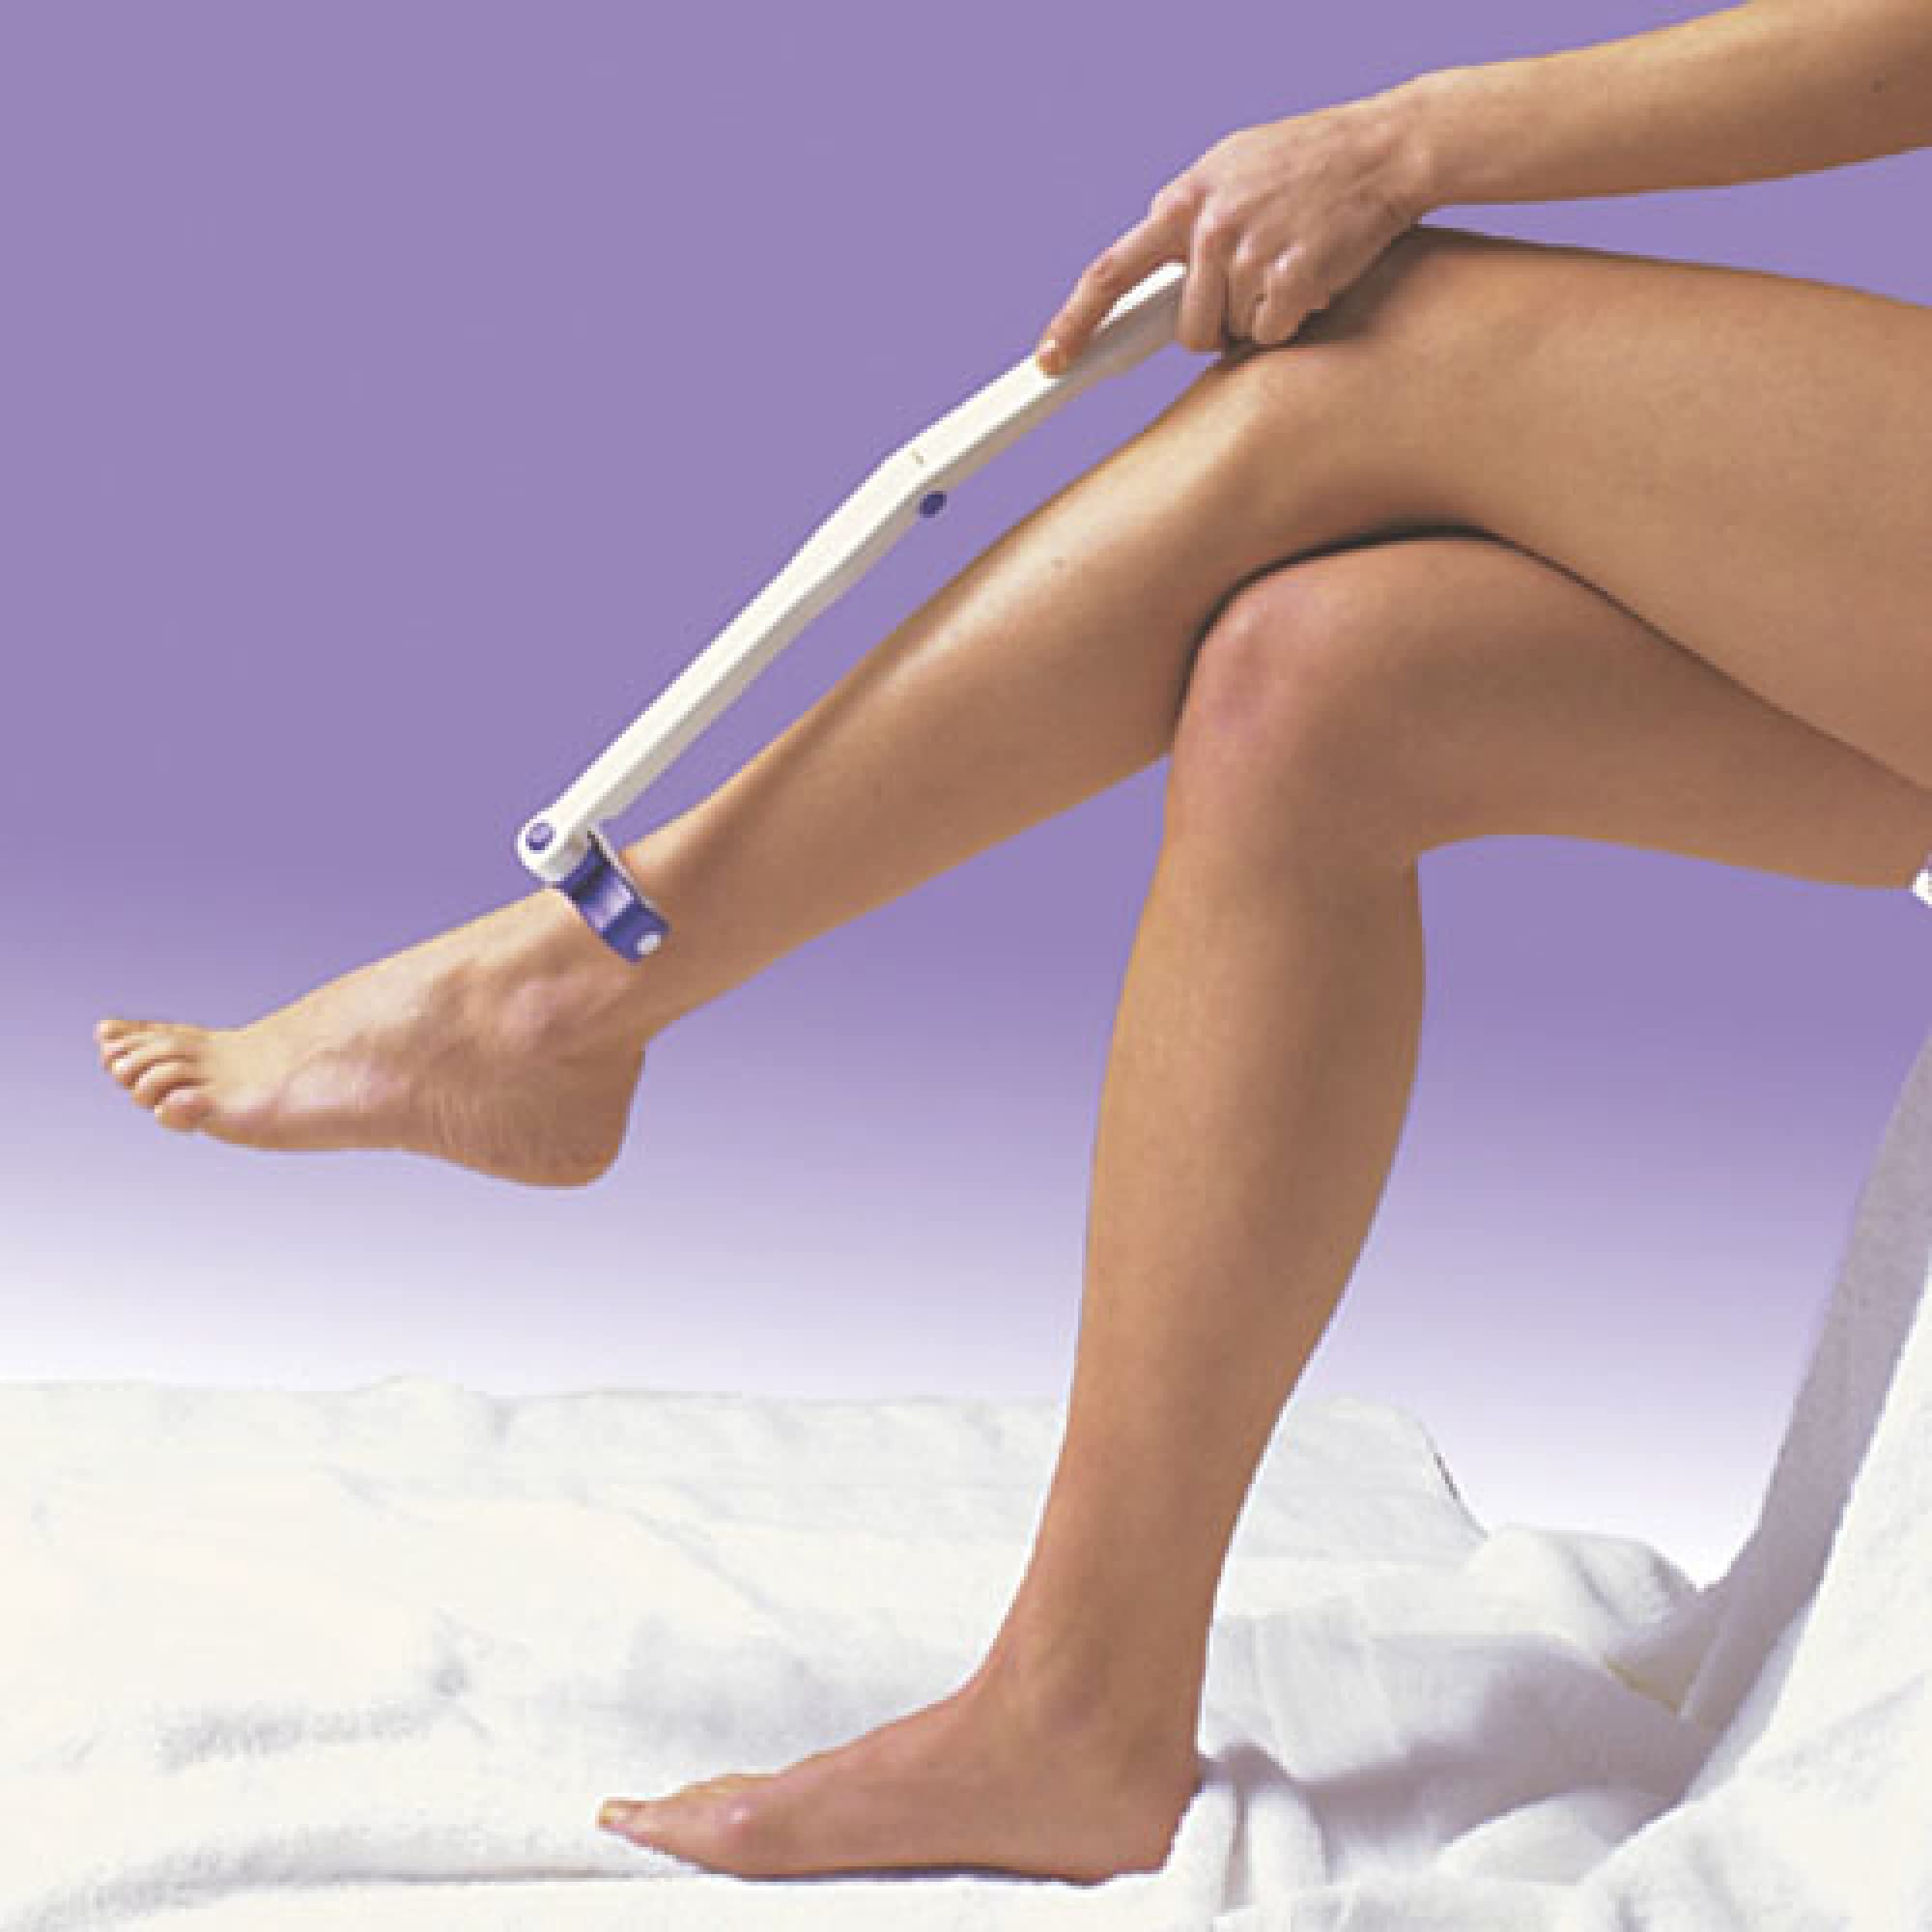 SP Ableware Roll Easy Lotion Applicator with Pivoting Handle and 2 Interchangeable Massage Rollers (741330050)